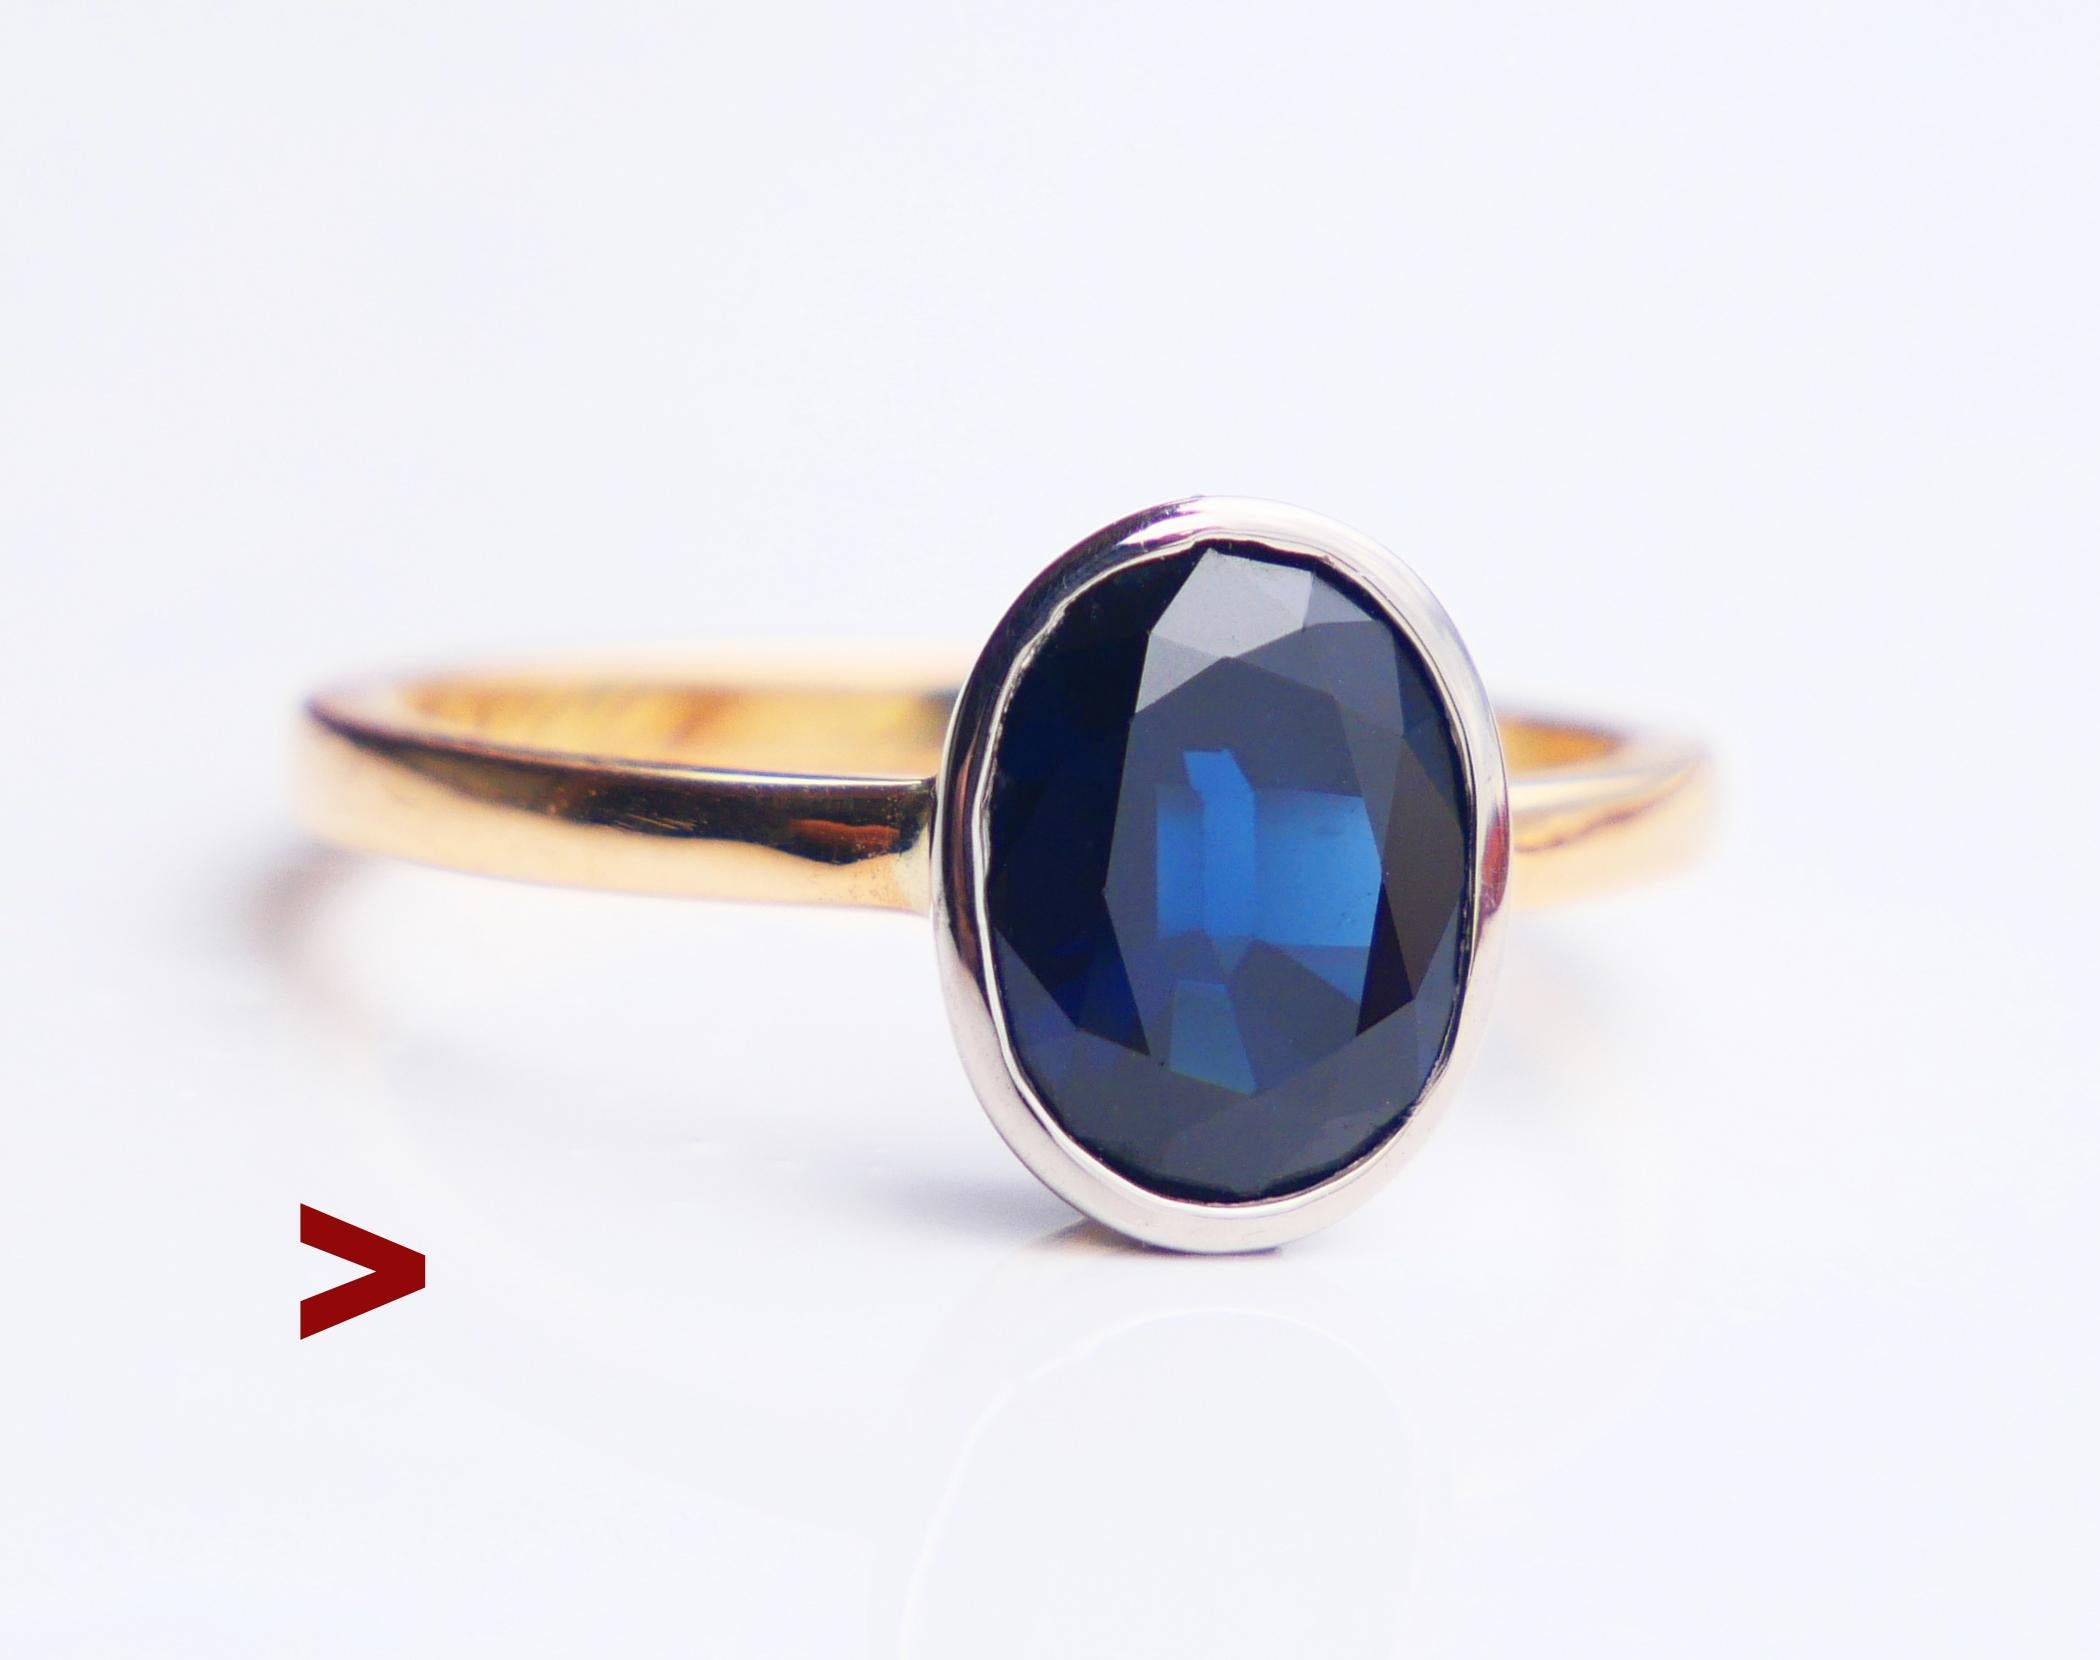 A Ring in solid 18K Yellow Gold with a crown in White Gold or Platinum holding natural Blue Sapphire of oval cut 10 mm x 8 mm x 3.33 mm / ca. 3.25 ct. Stone demonstrates color zoning typical for naturals. Medium Blue Color.

Swedish hallmarks, 18K ,